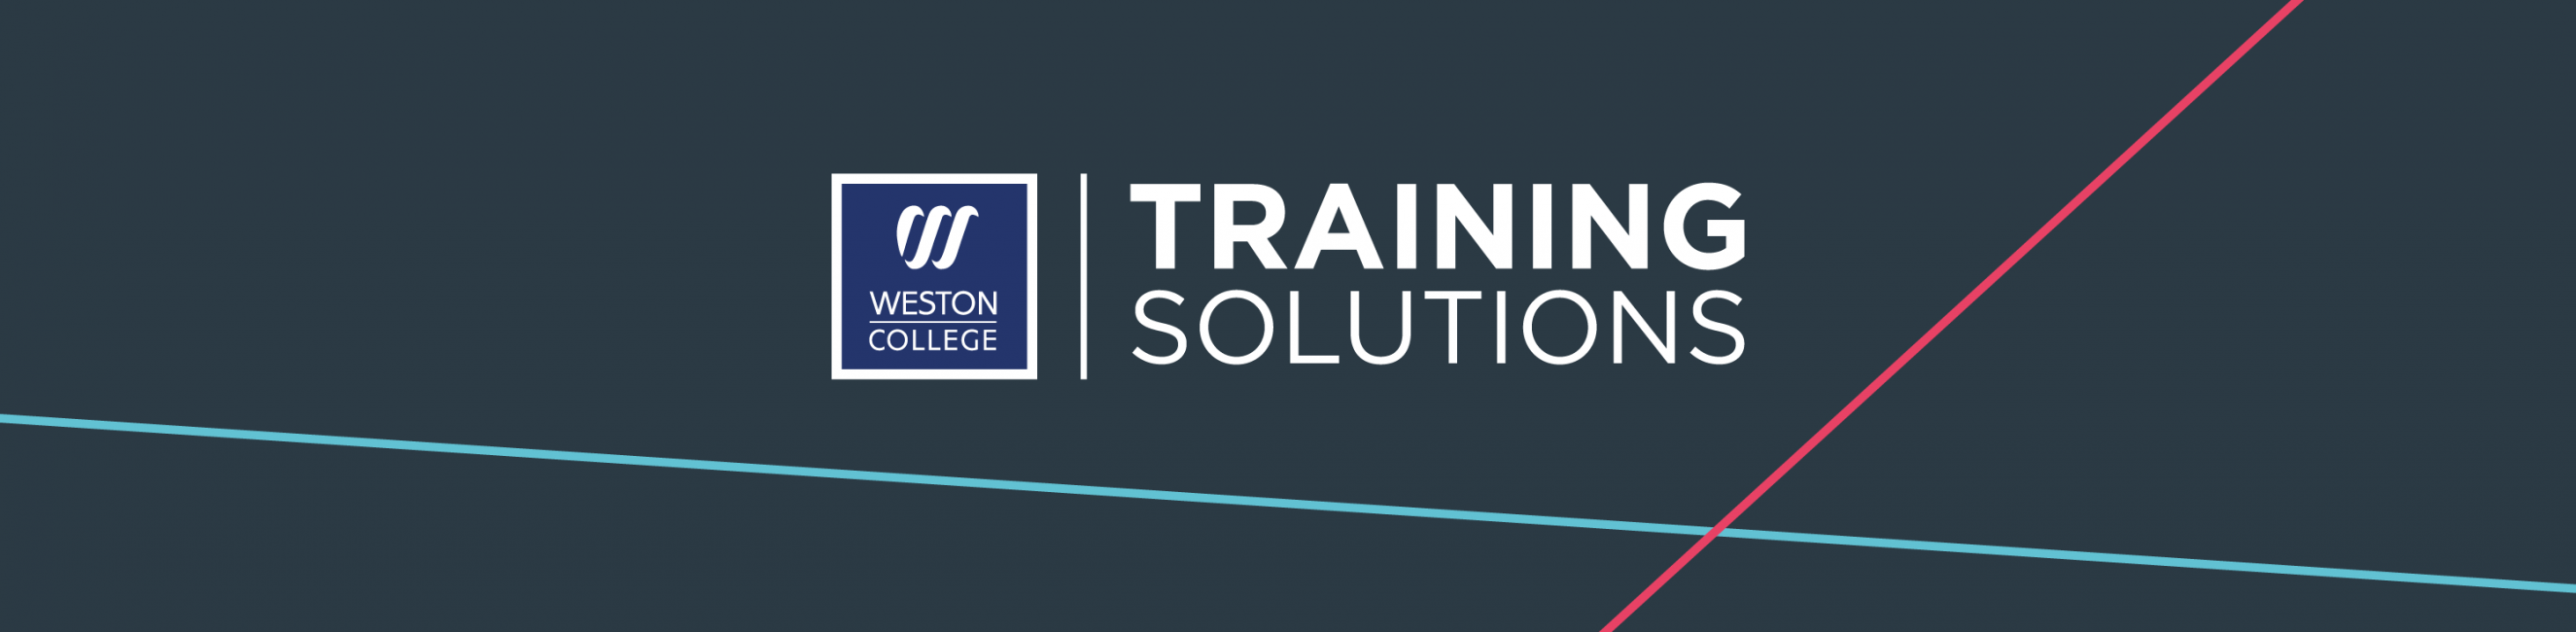 Training Solutions from Weston College